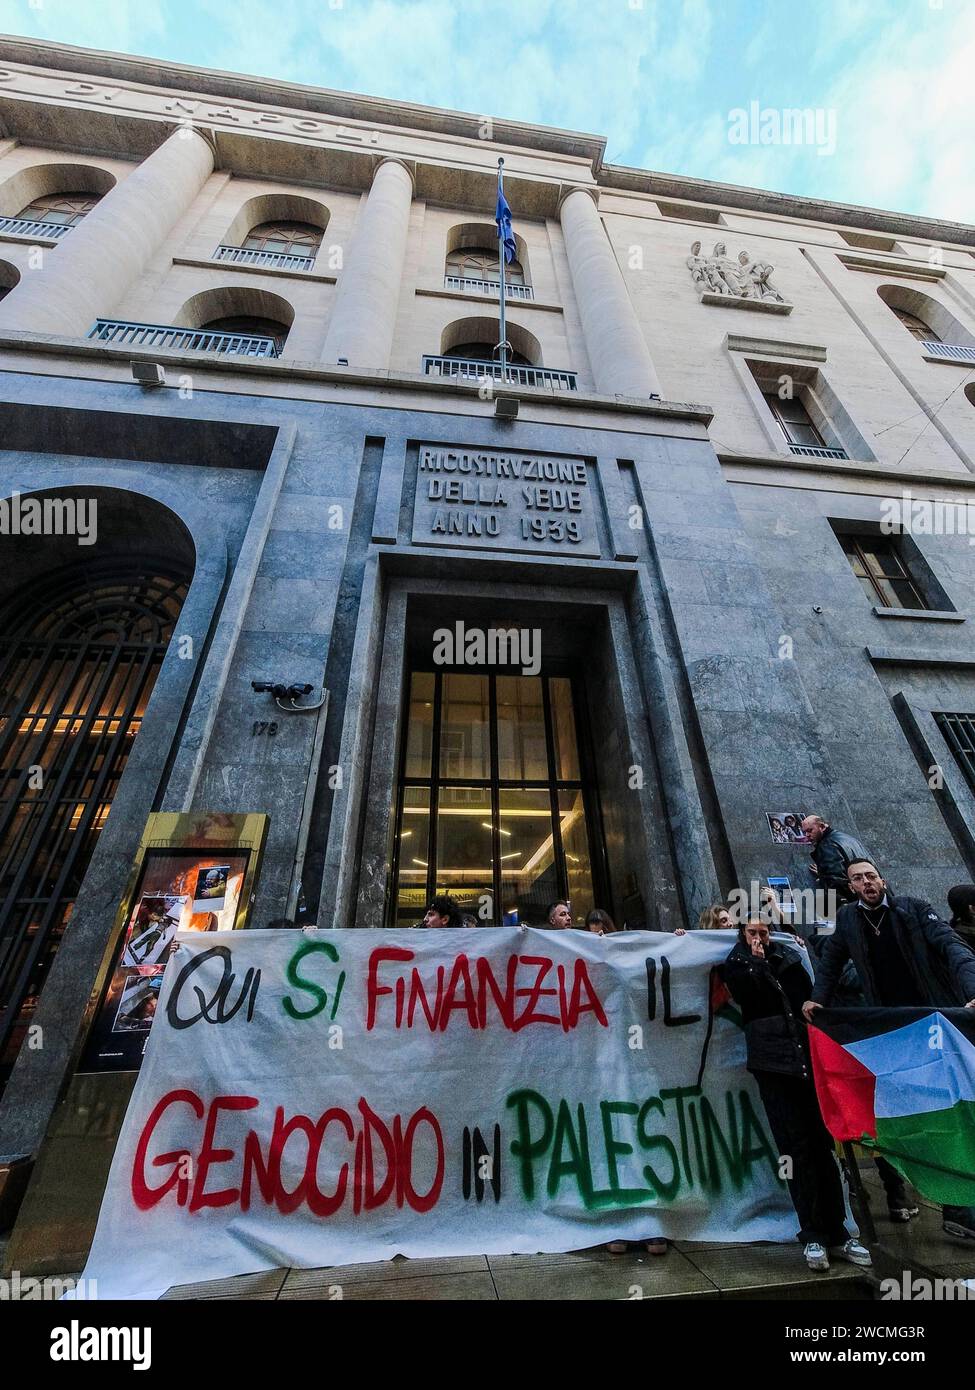 Pro-Palestinian blitz at the Intesa Sanpaolo bank Pro-Palestinian blitz at the Intesa Sanpaolo headquarters in via Toledo. This afternoon, a few dozen activists burst into the intesa san paolo bank building, chanting chants and slogans for the people of Gaza. Here the genocide in Palestine is being financed reads a large banner unfurled in front of the bank, papered by the protesters with leaflets depicting the macabre images of children who died under bombing in the Middle East. DJI 0719 Copyright: xAntonioxBalascox Stock Photo